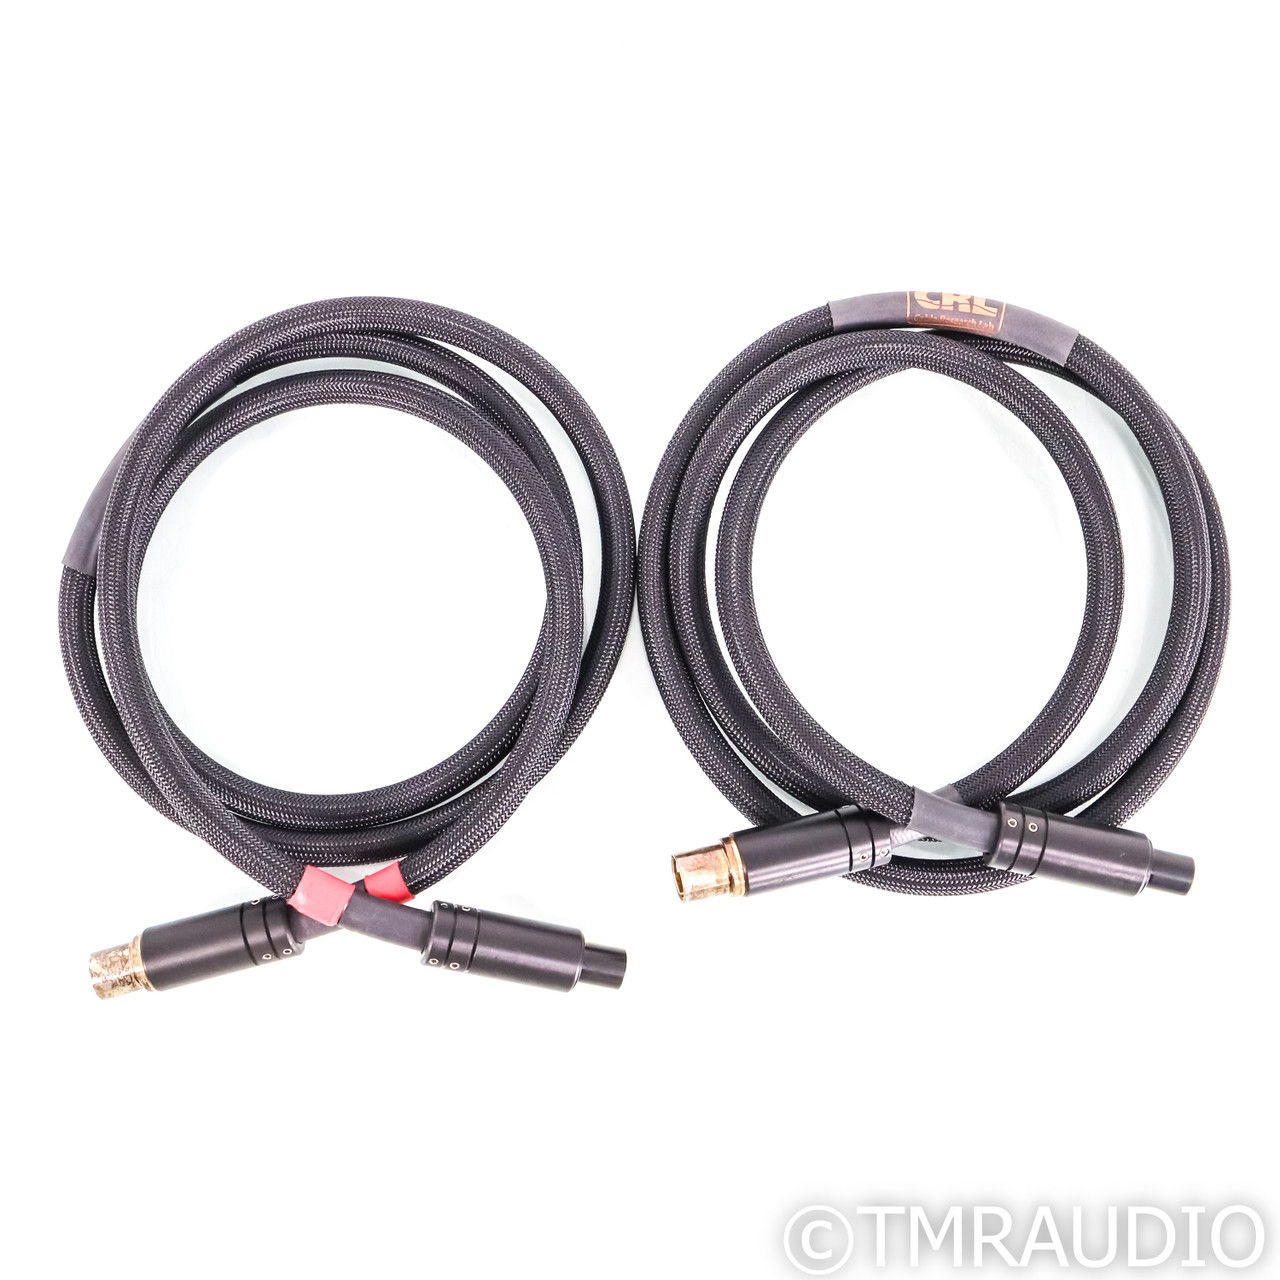 Cable Research Lab Bronze XLR Cables; 2m Pair Balanced ... 3